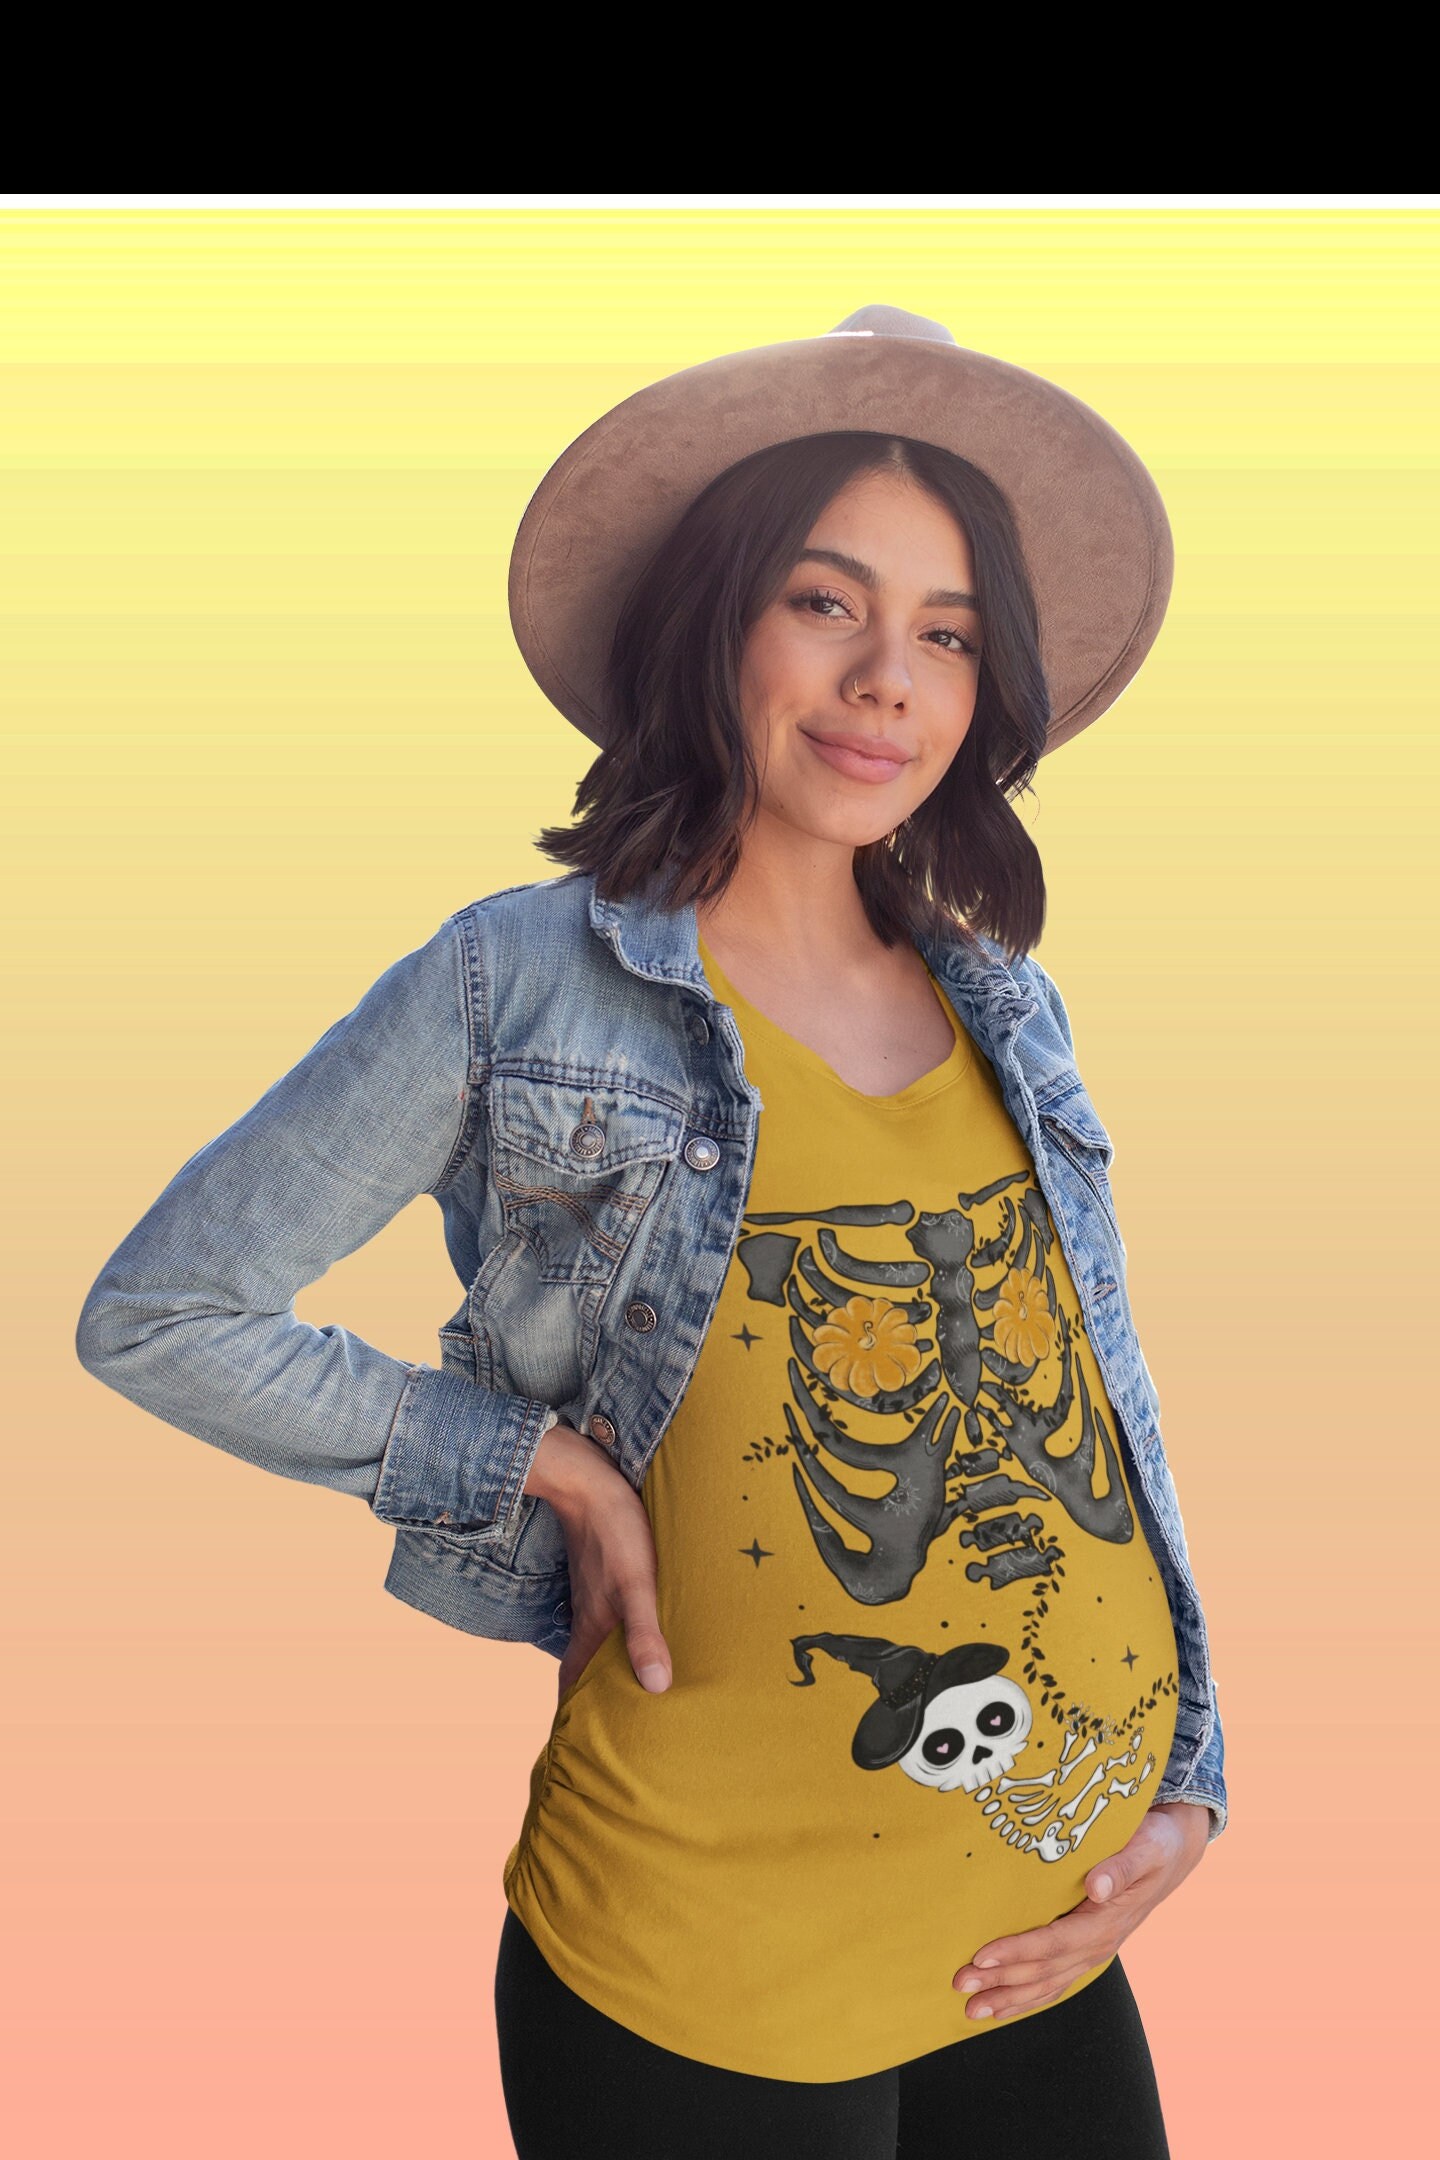 Discover Pregnant Witch Shirt, Witch Skeleton Maternity Shirt, Halloween Maternity Shirt, Ribcage Baby, Pregnant Skeleton Shirt, Funny Maternity